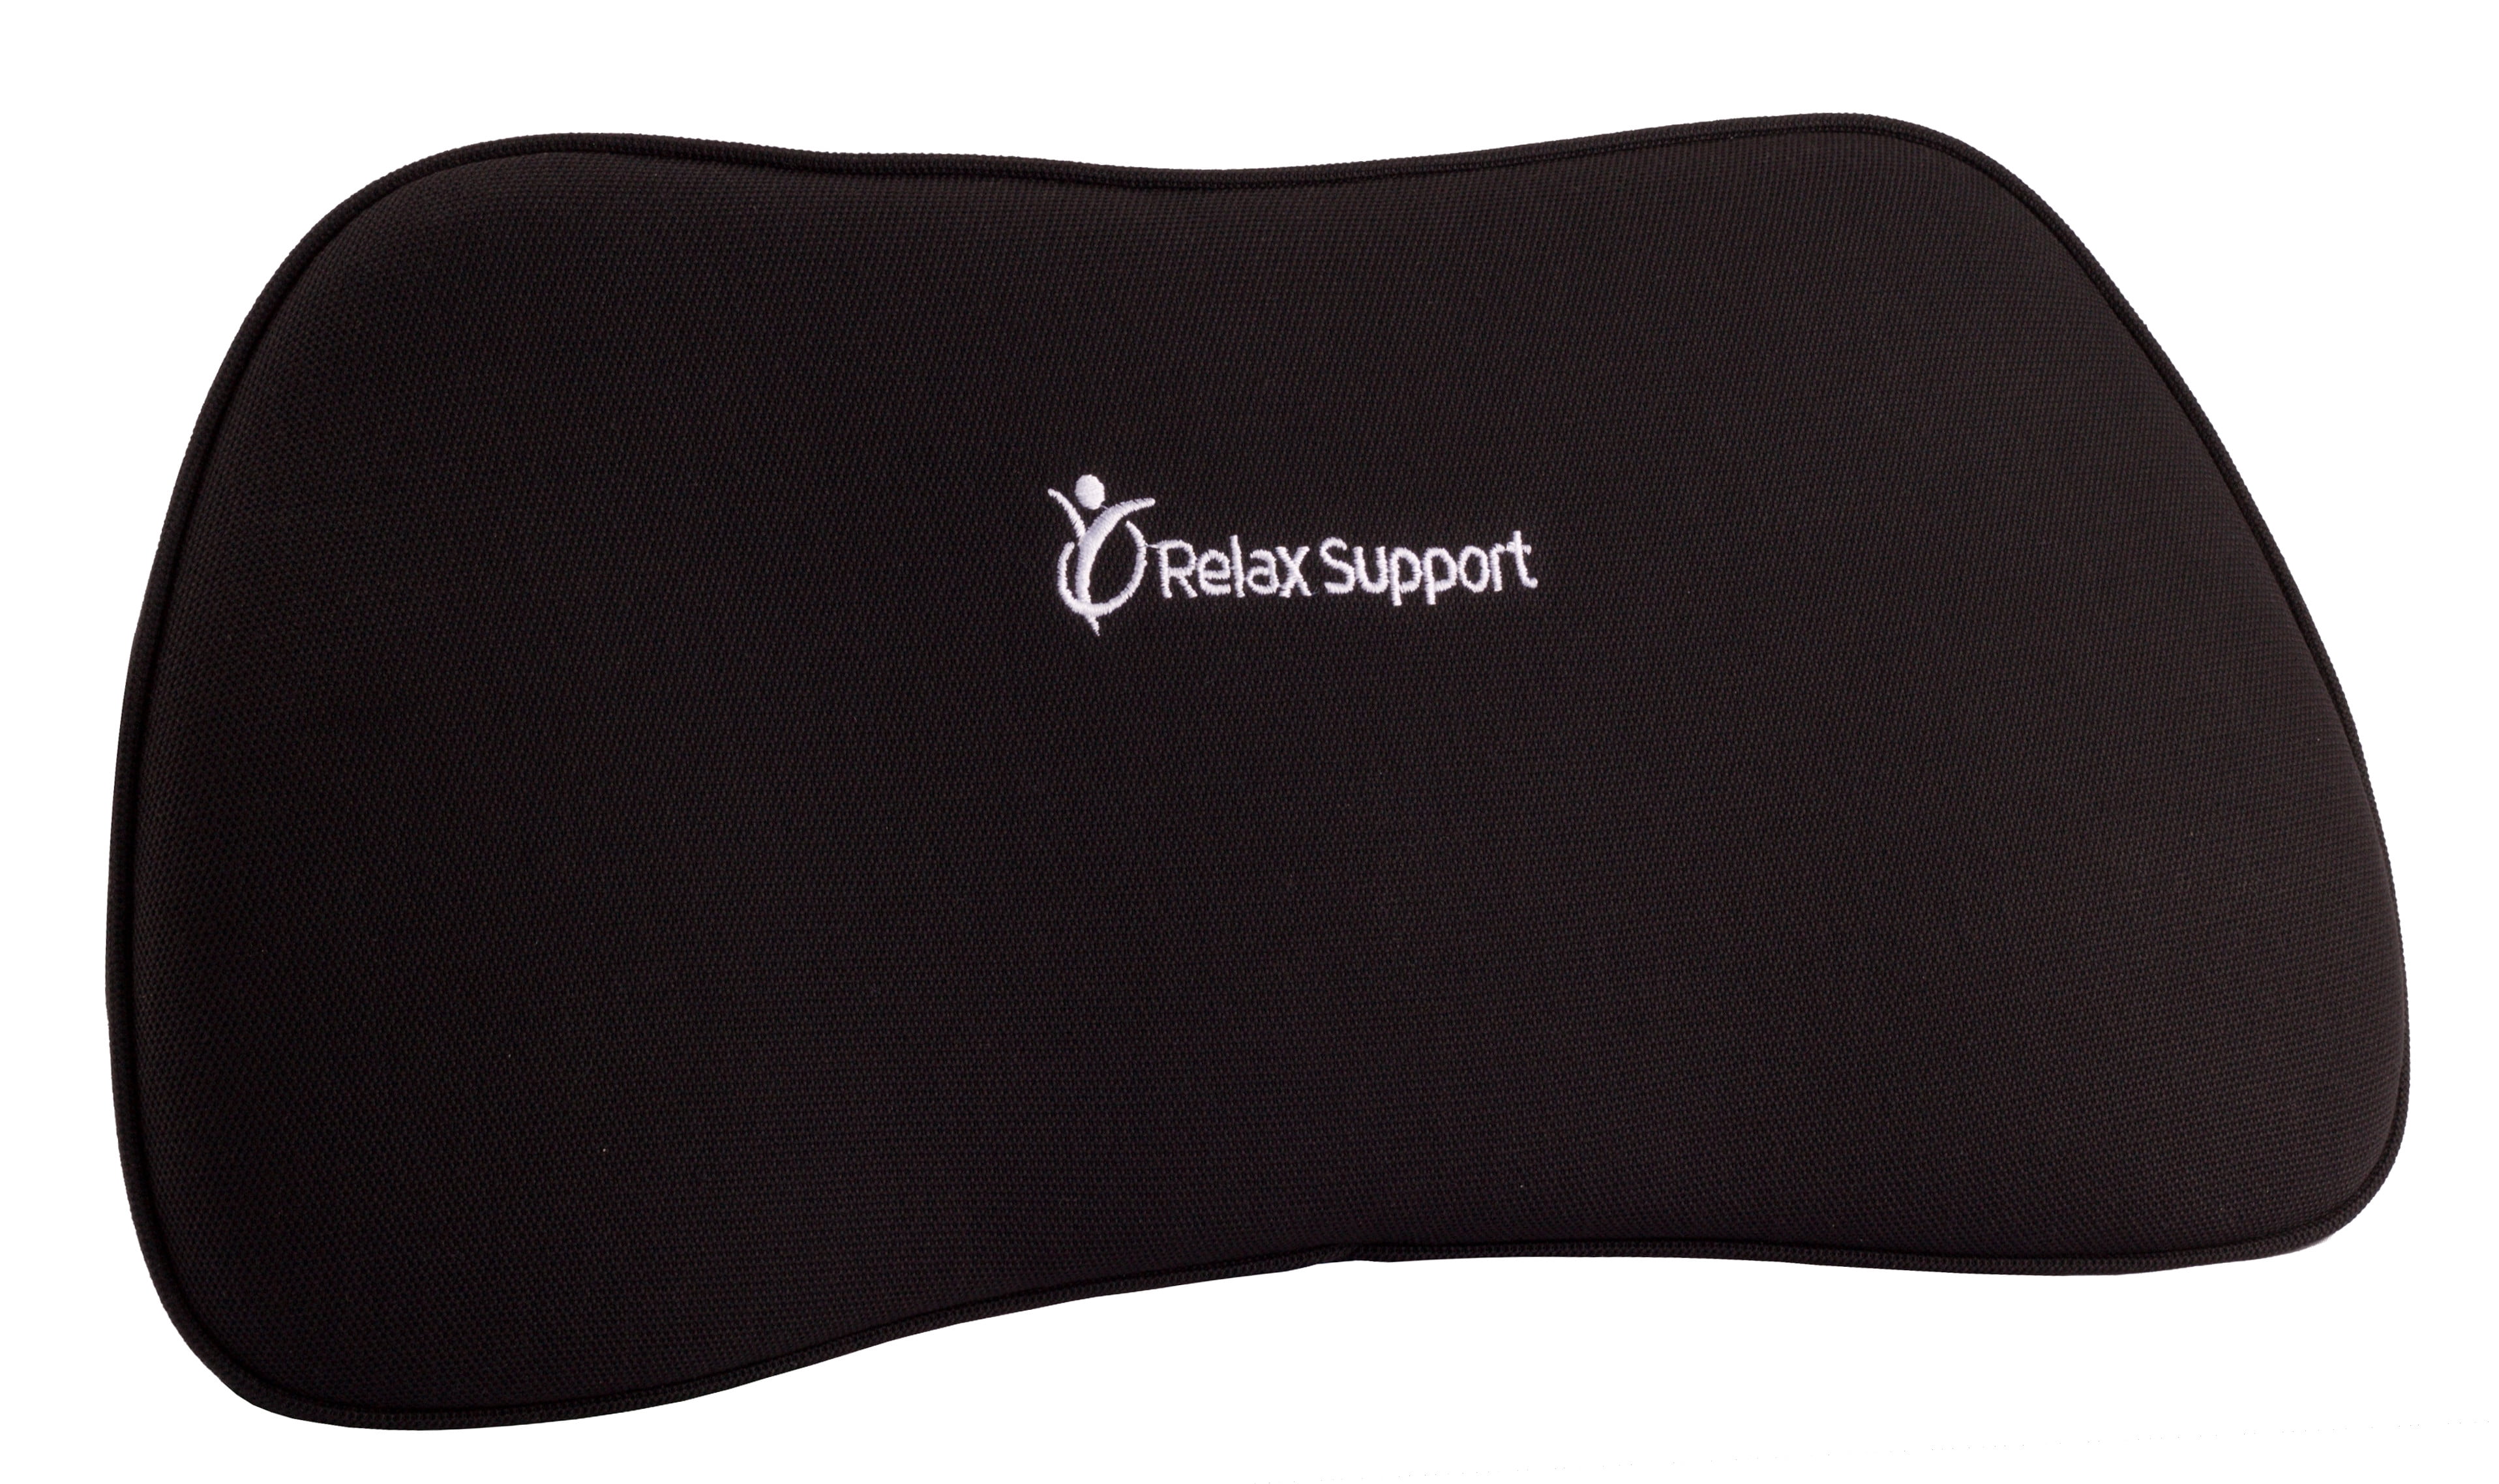 Relax Support Rs13-s Lumbar Support Pillow for Car - Full Memory Foam, Adjustable Dual Straps, Medium Firm - Promotes Good Spinal Posture&comfortable